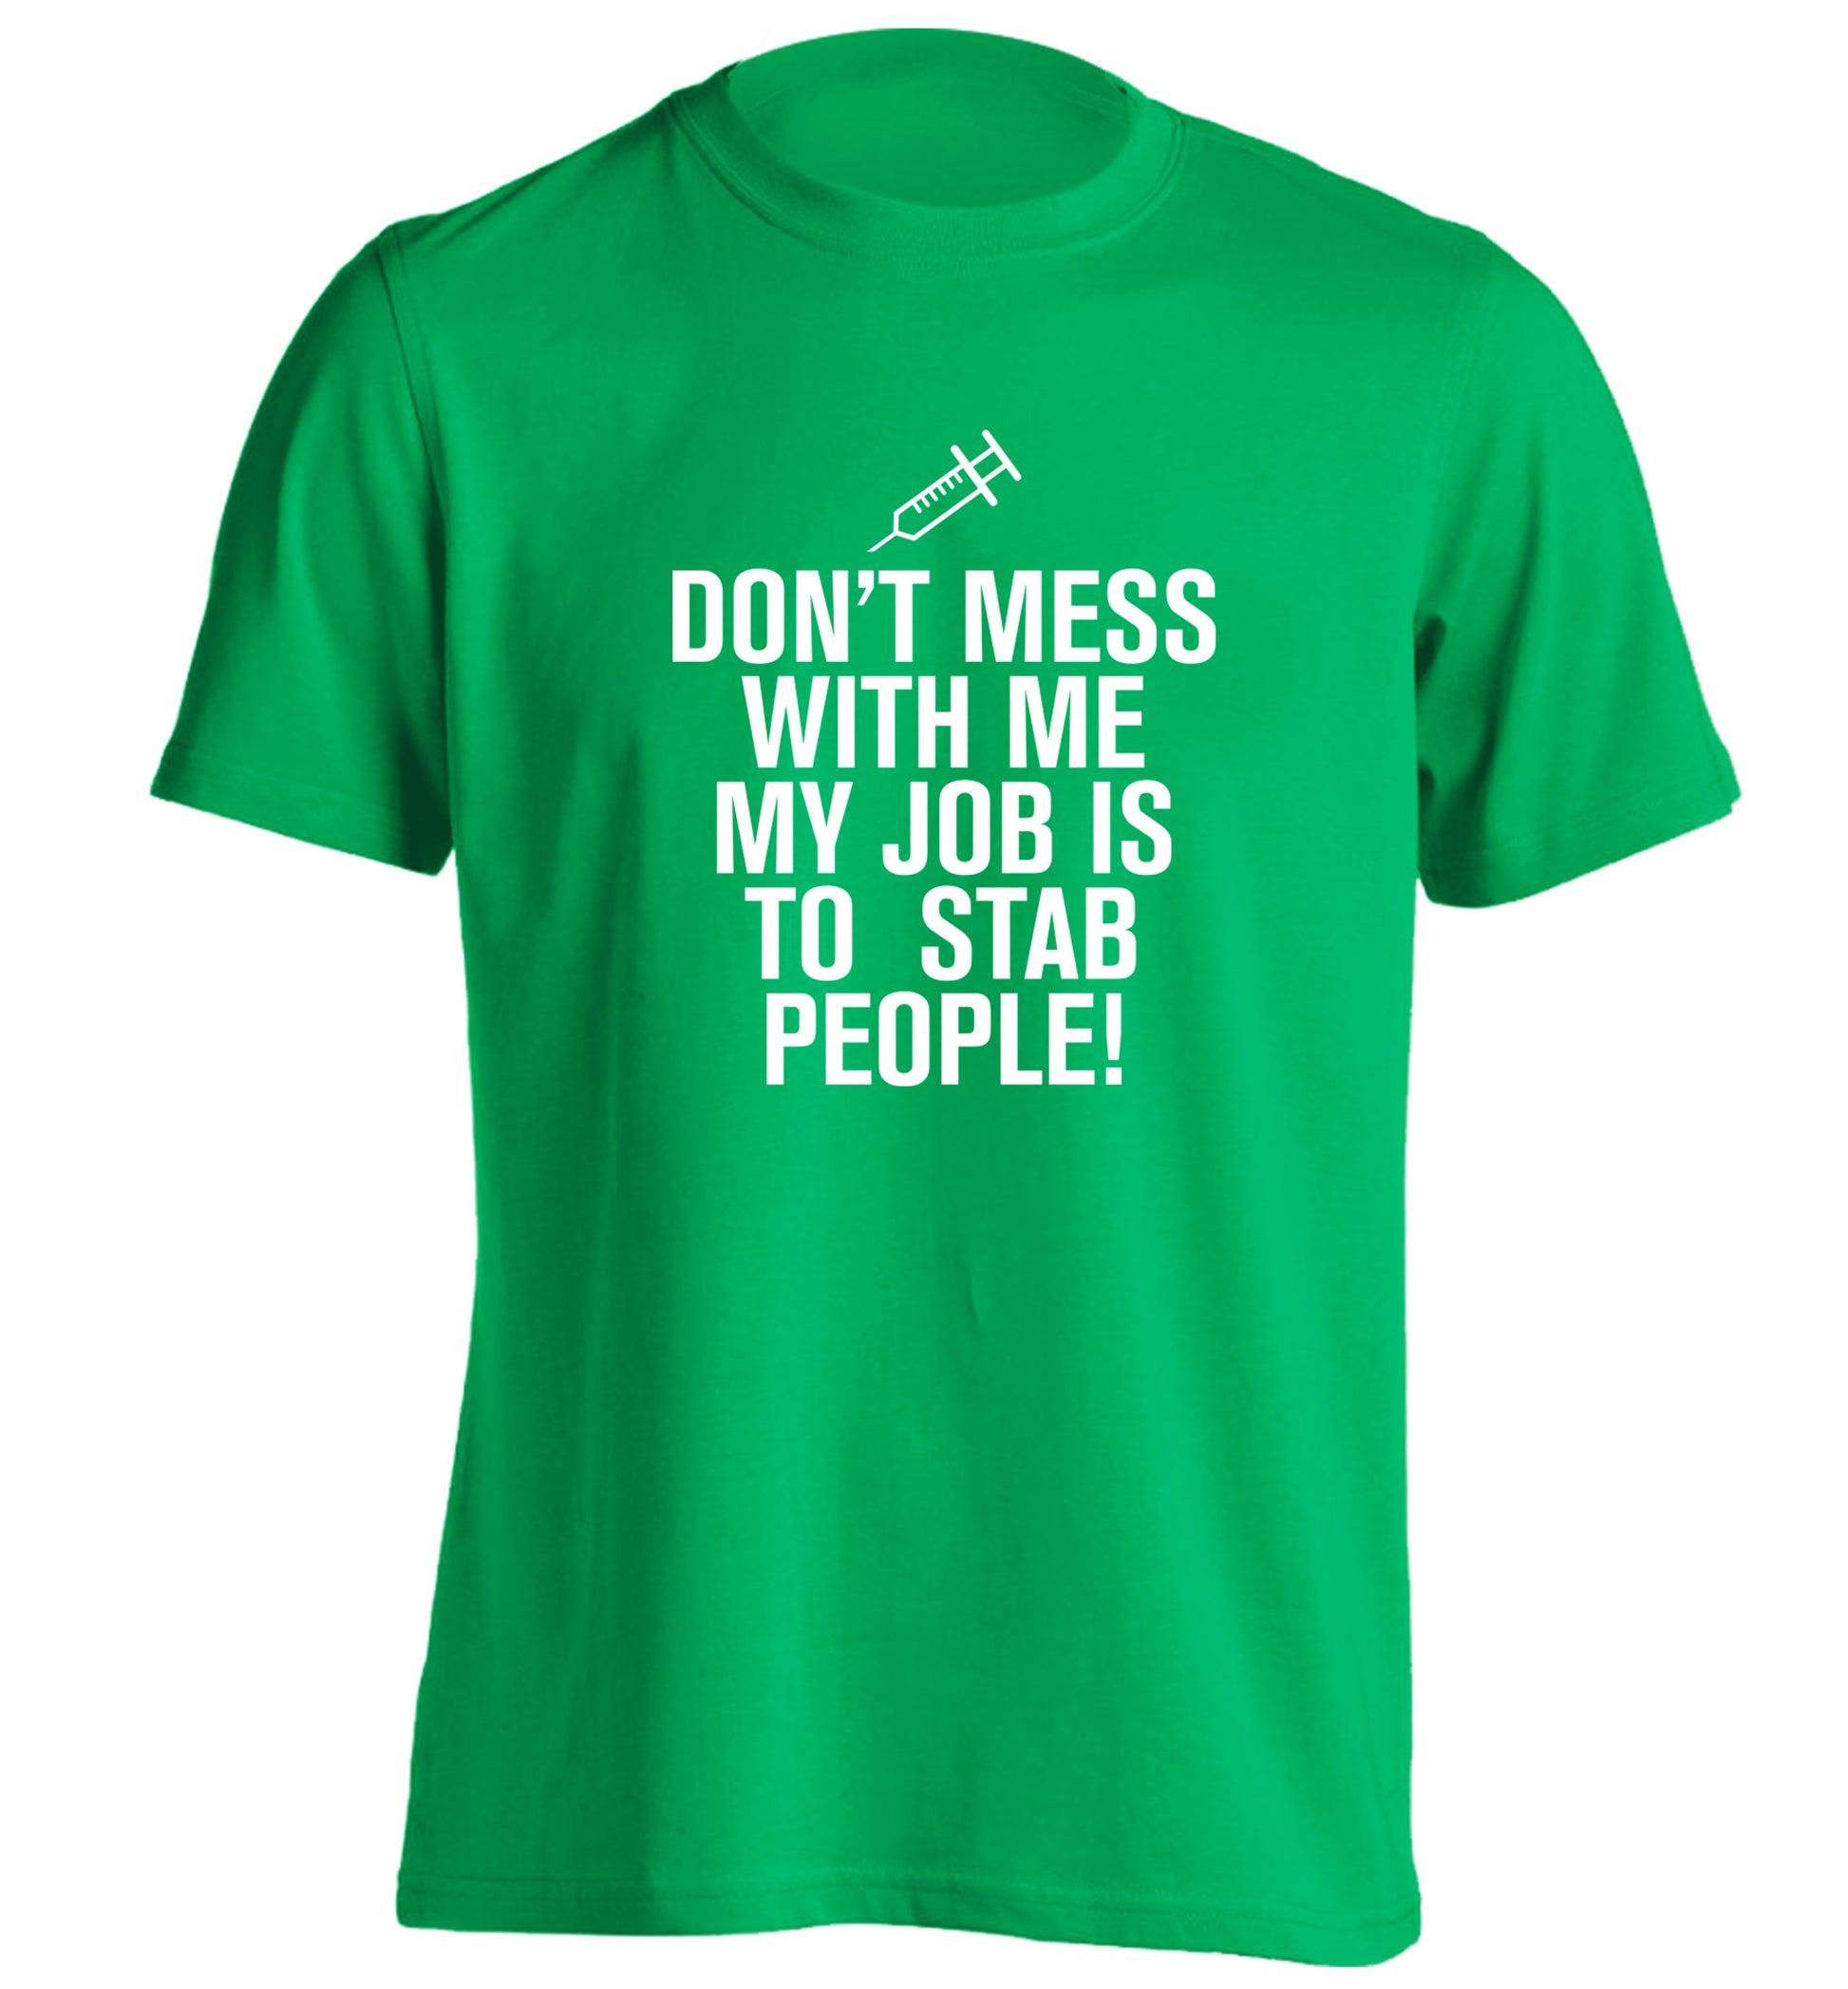 Don't mess with me my job is to stab people! adults unisex green Tshirt 2XL